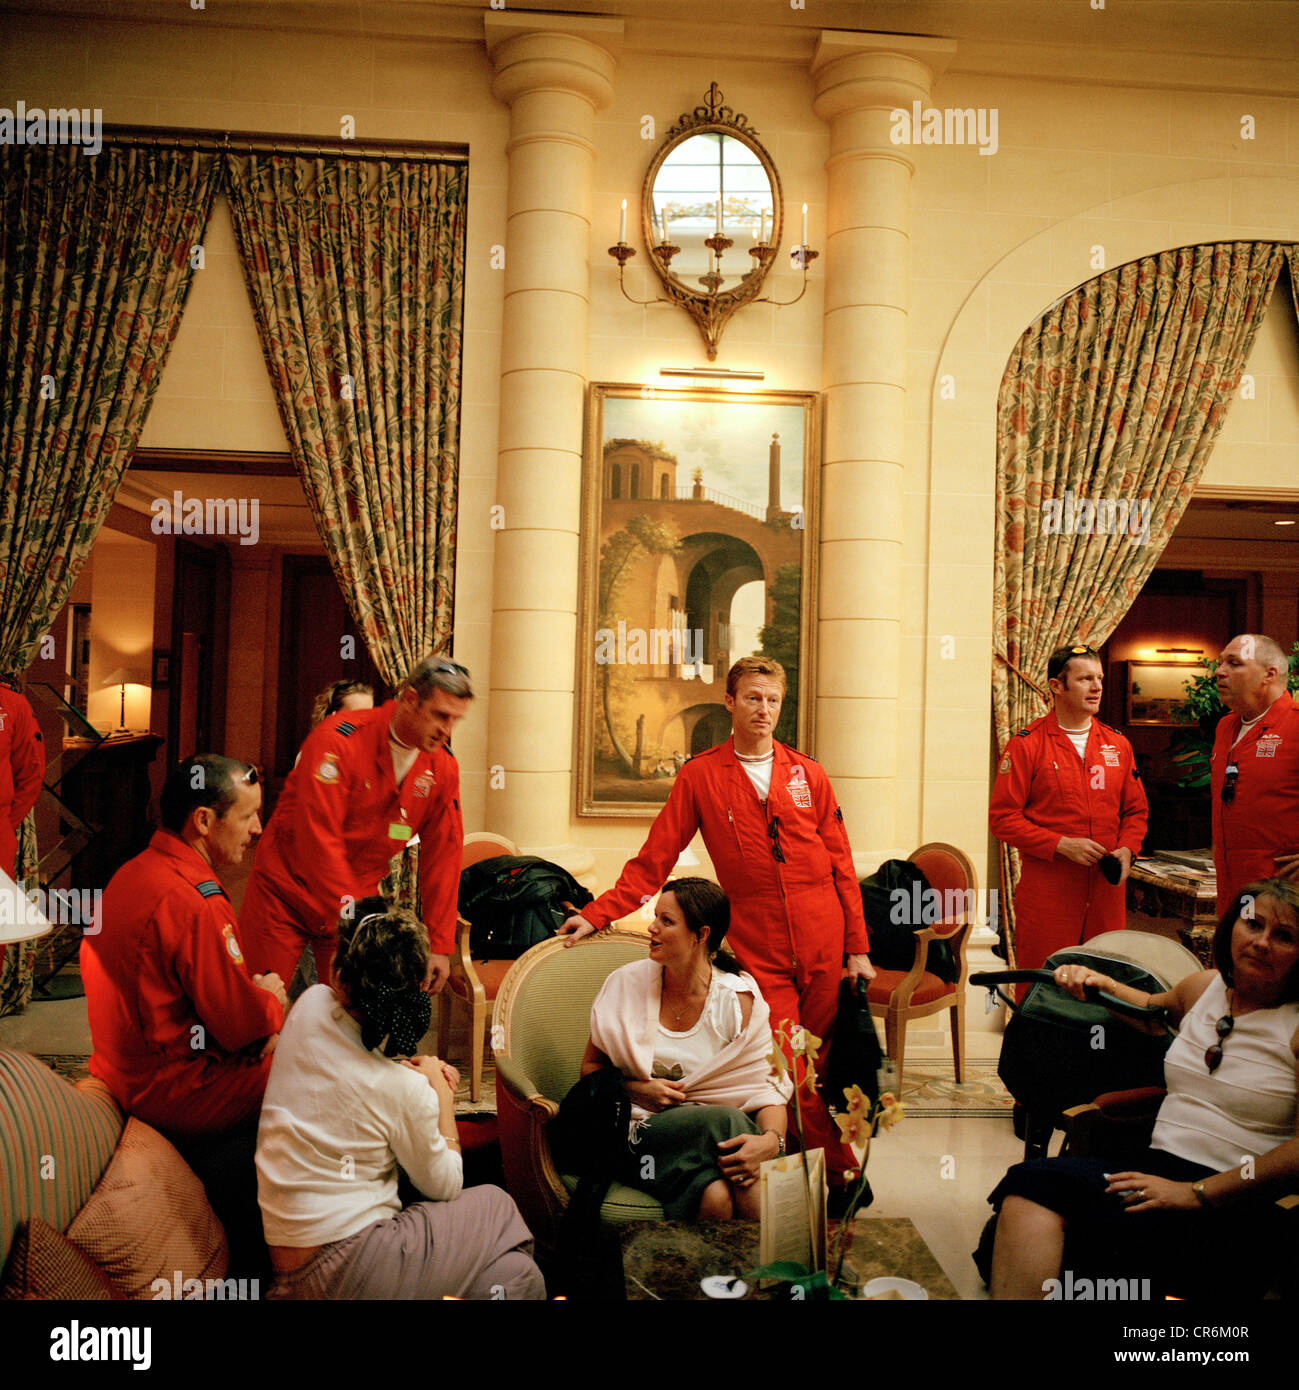 Pilots of the Red Arrows, Britain's RAF aerobatic team gather in hotel after their Bastille Day flypast over Paris. Stock Photo